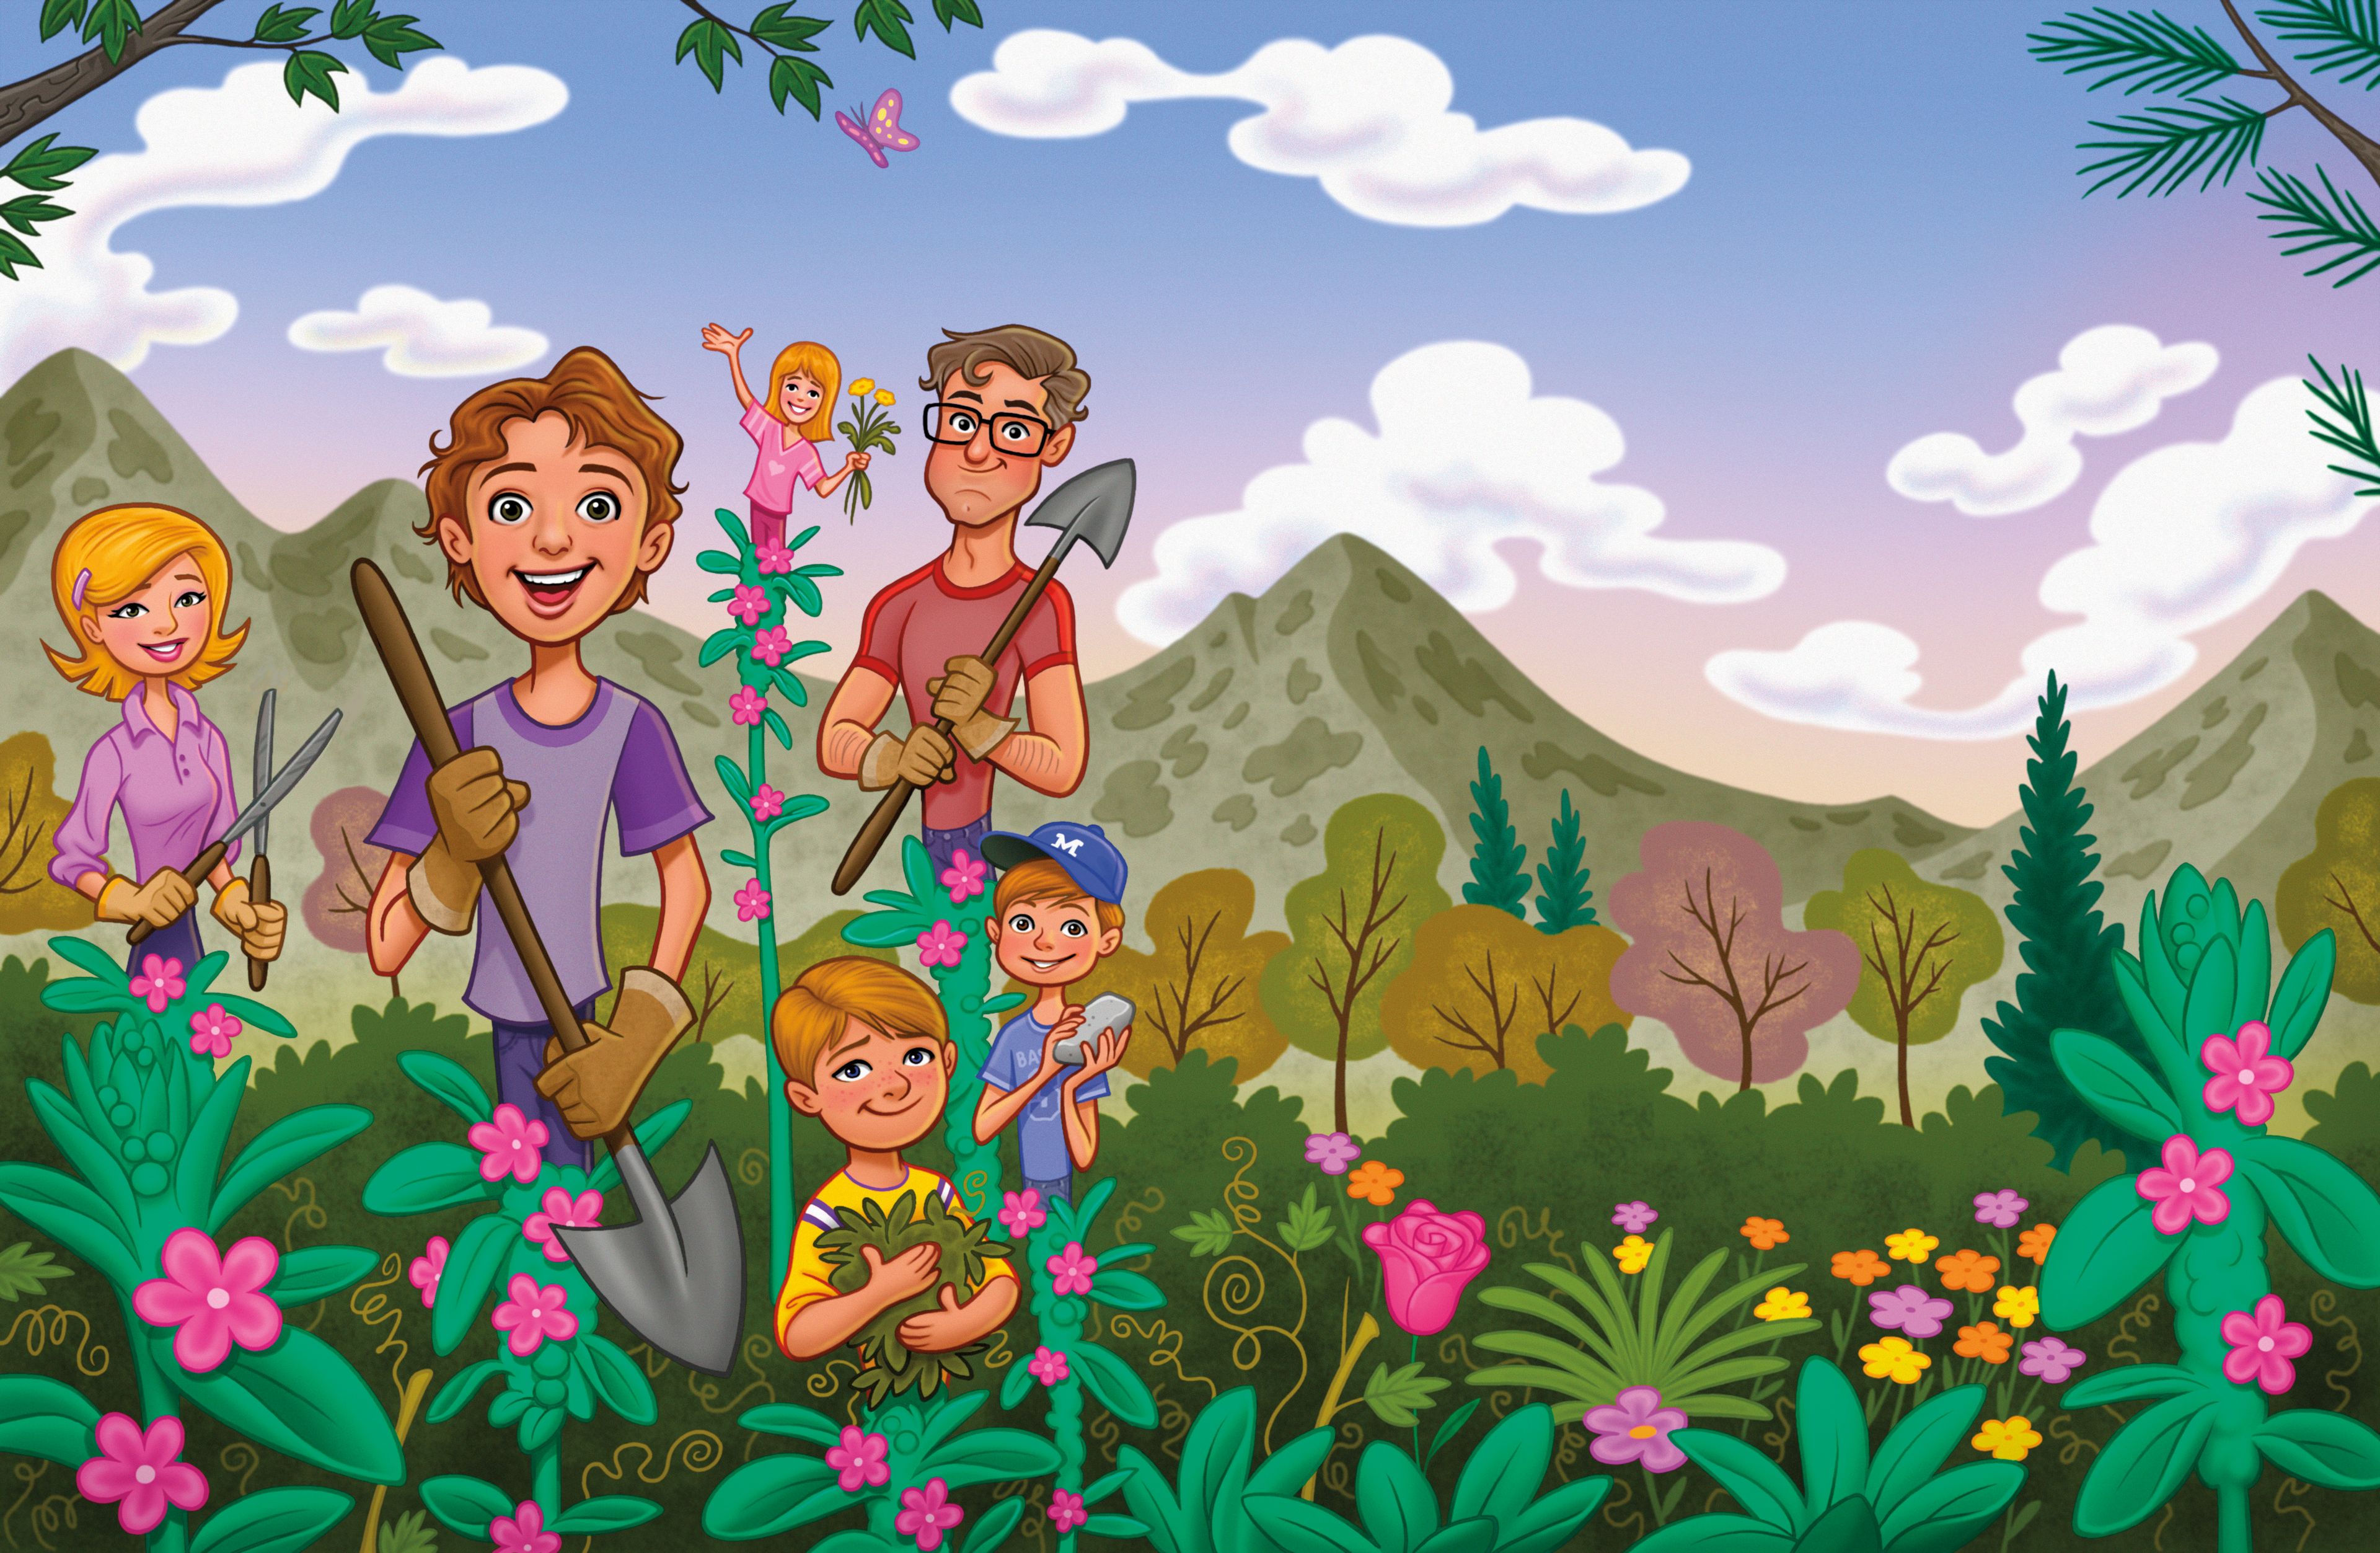 A family works in a flower garden together outside.